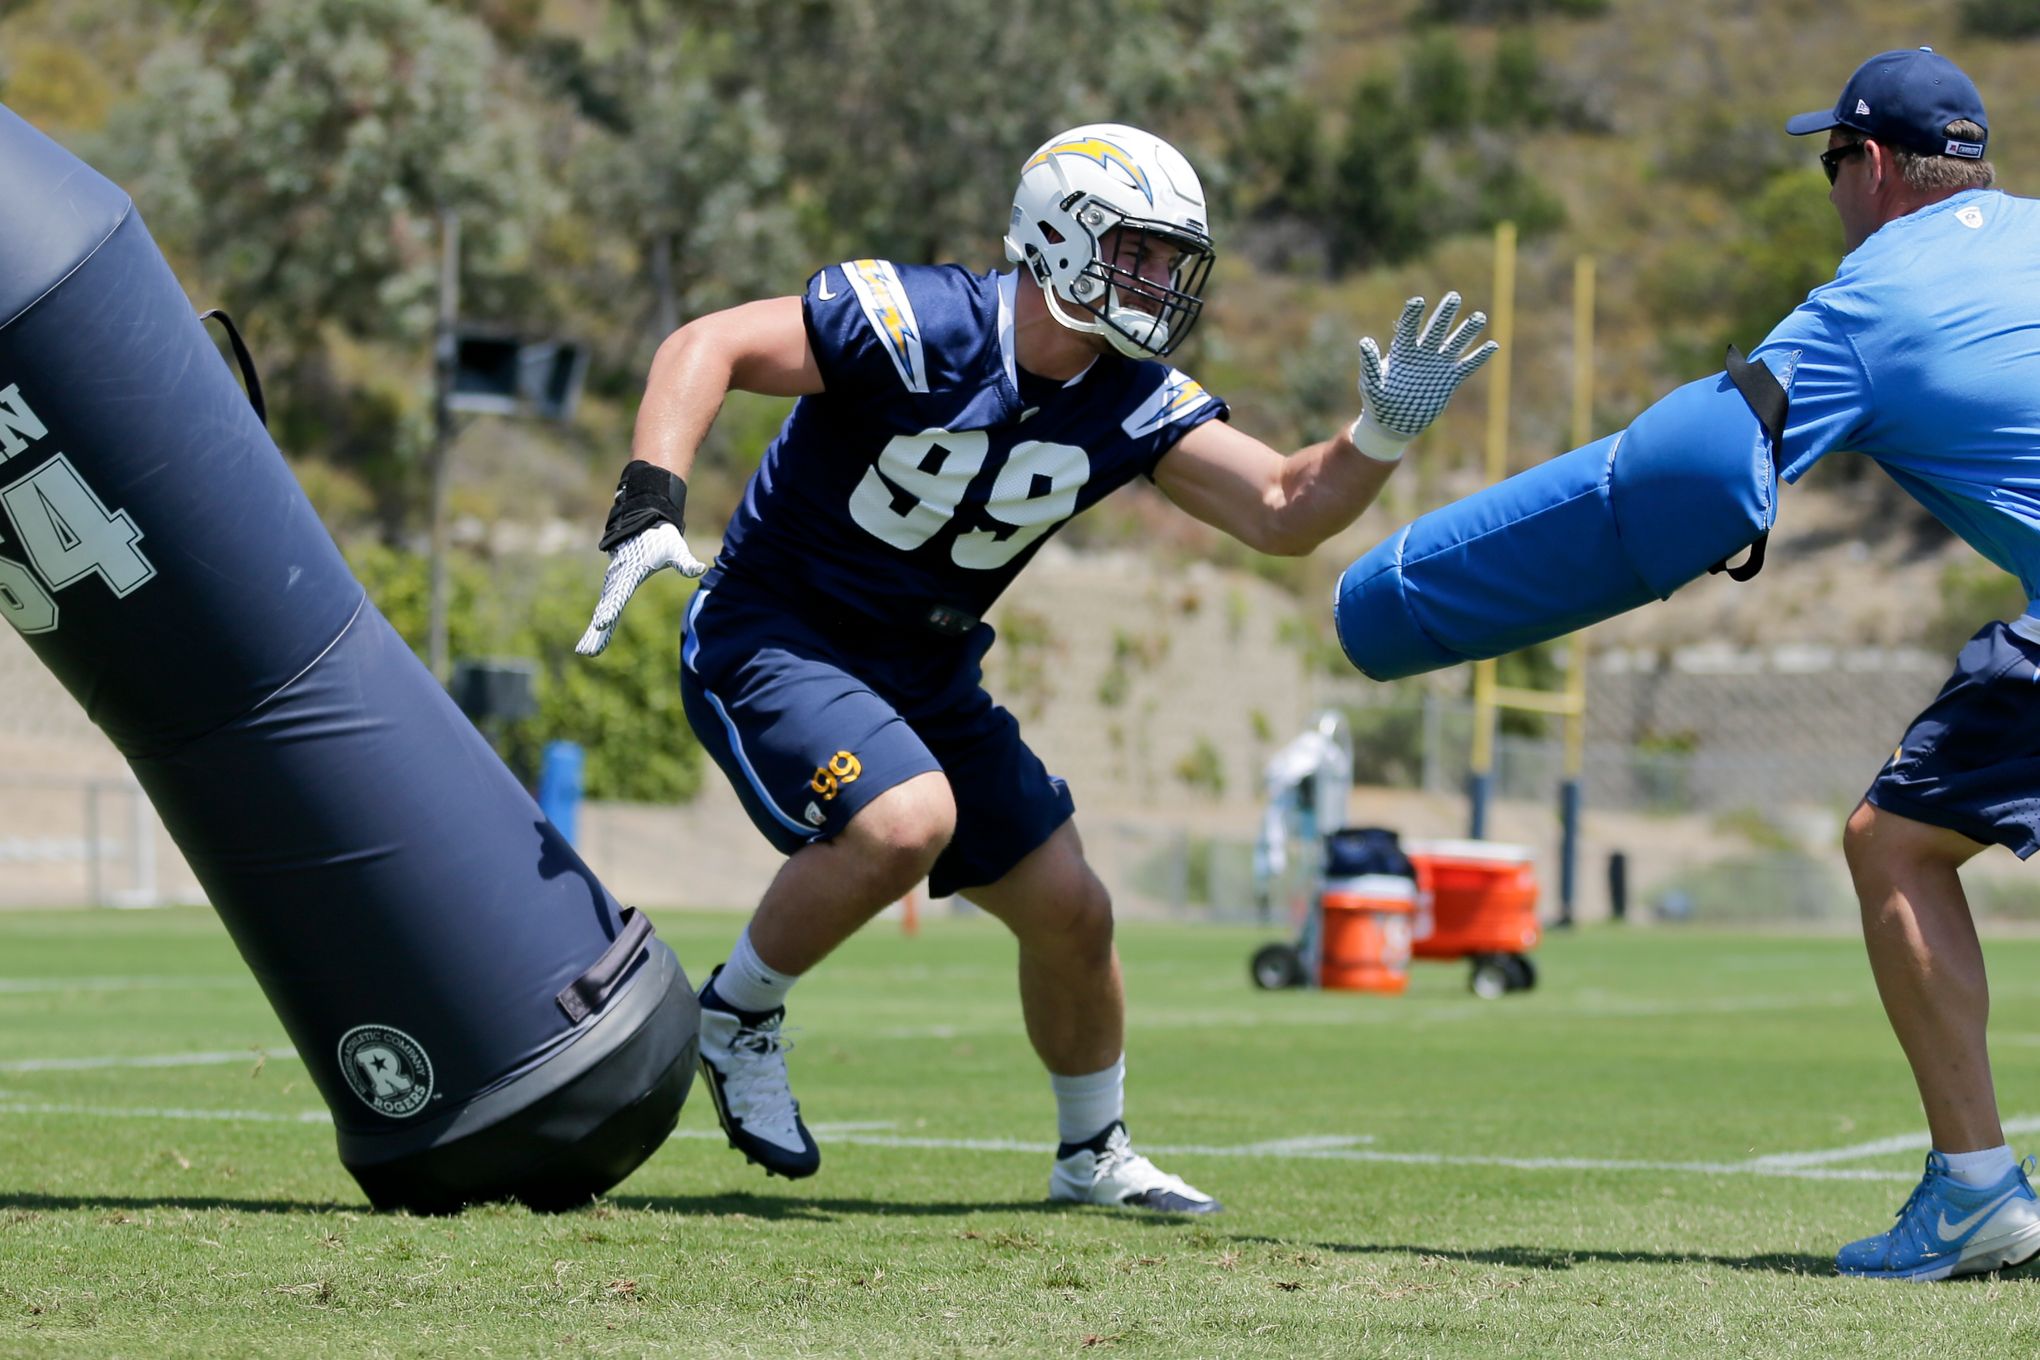 Chargers sign rookie Joey Bosa to 4-year deal